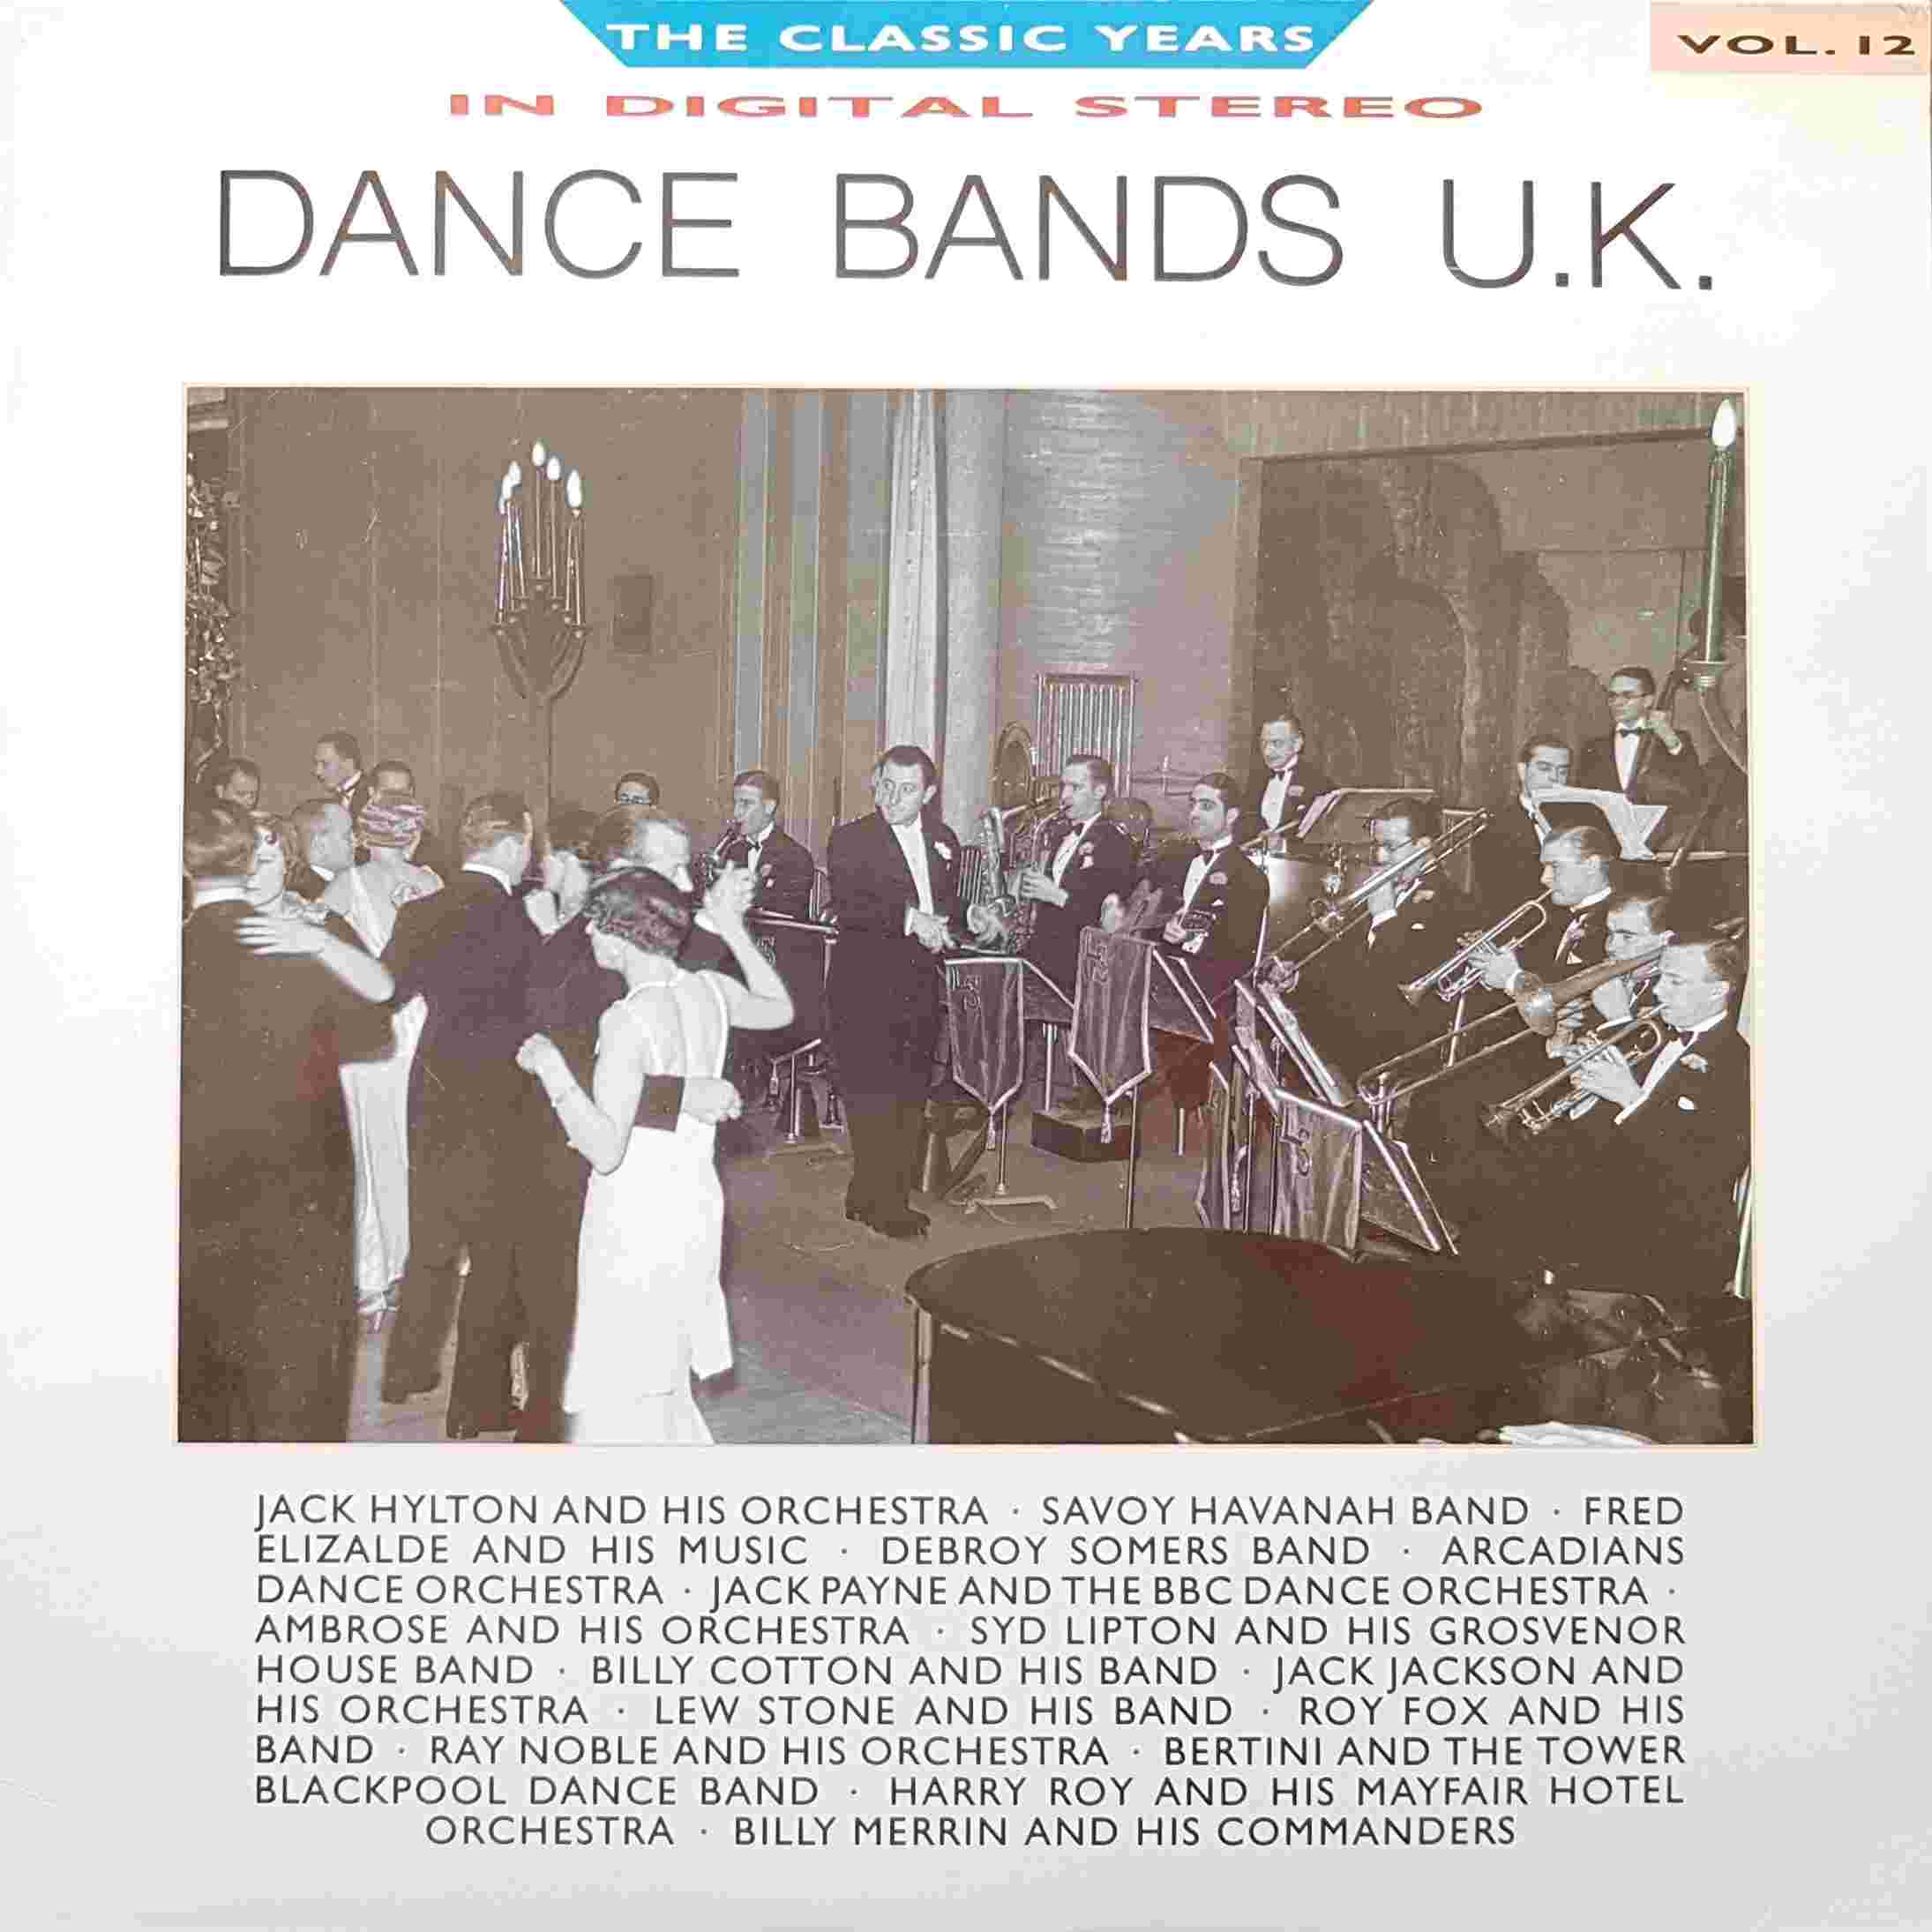 Picture of REB 681 Classic years - Volume 12, Dance bands UK by artist Various from the BBC albums - Records and Tapes library